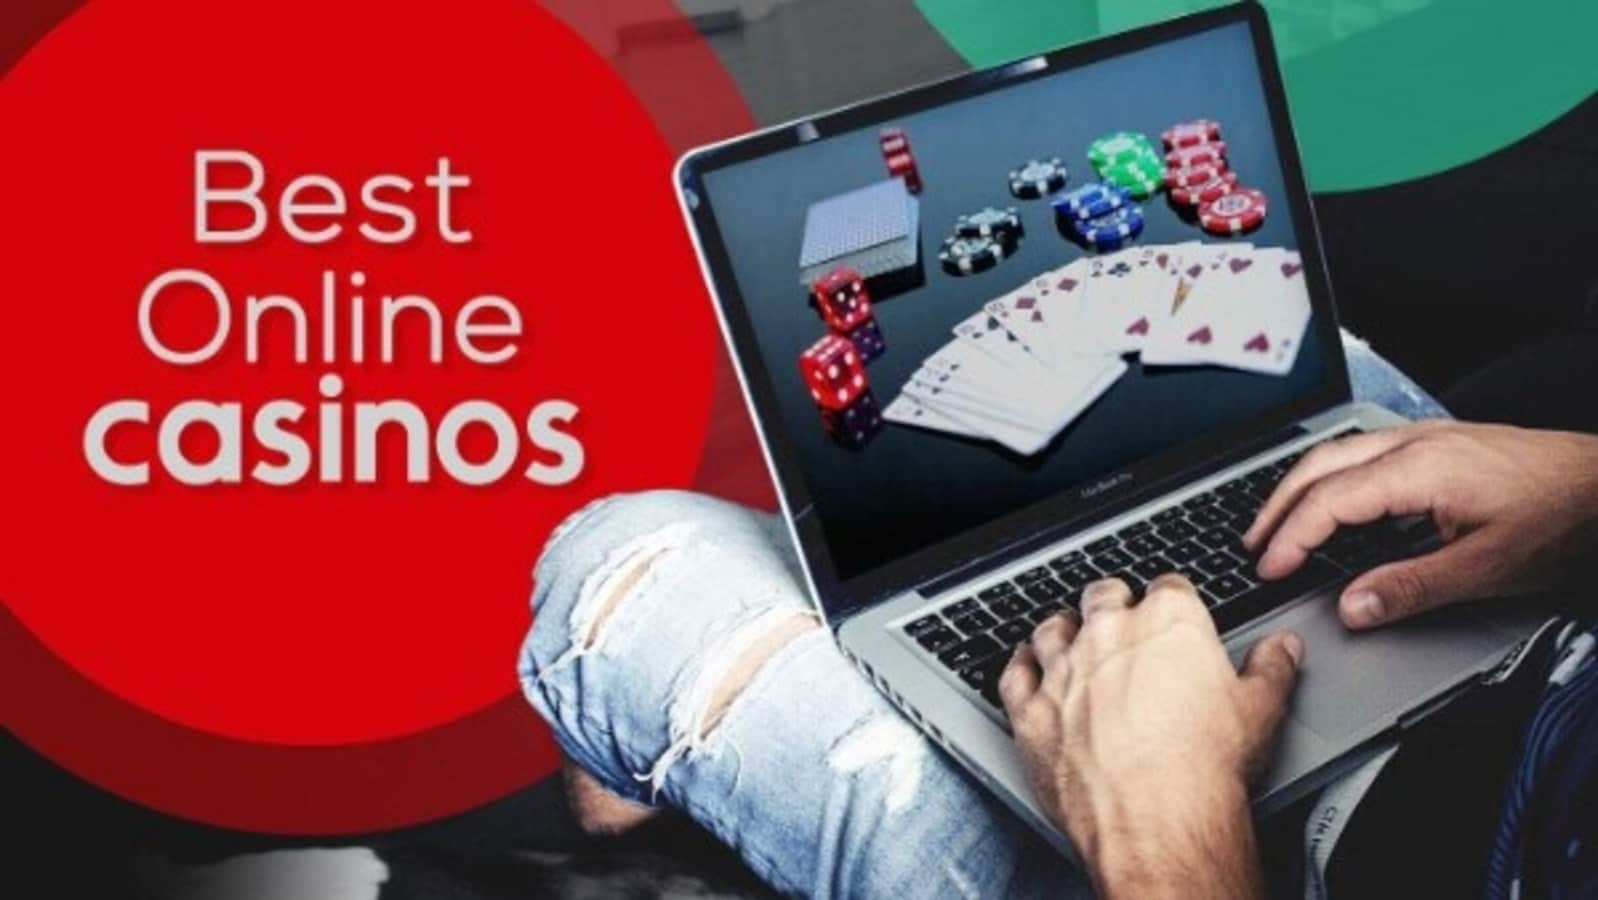 Now You Can Have Your 24/7 online casino Done Safely